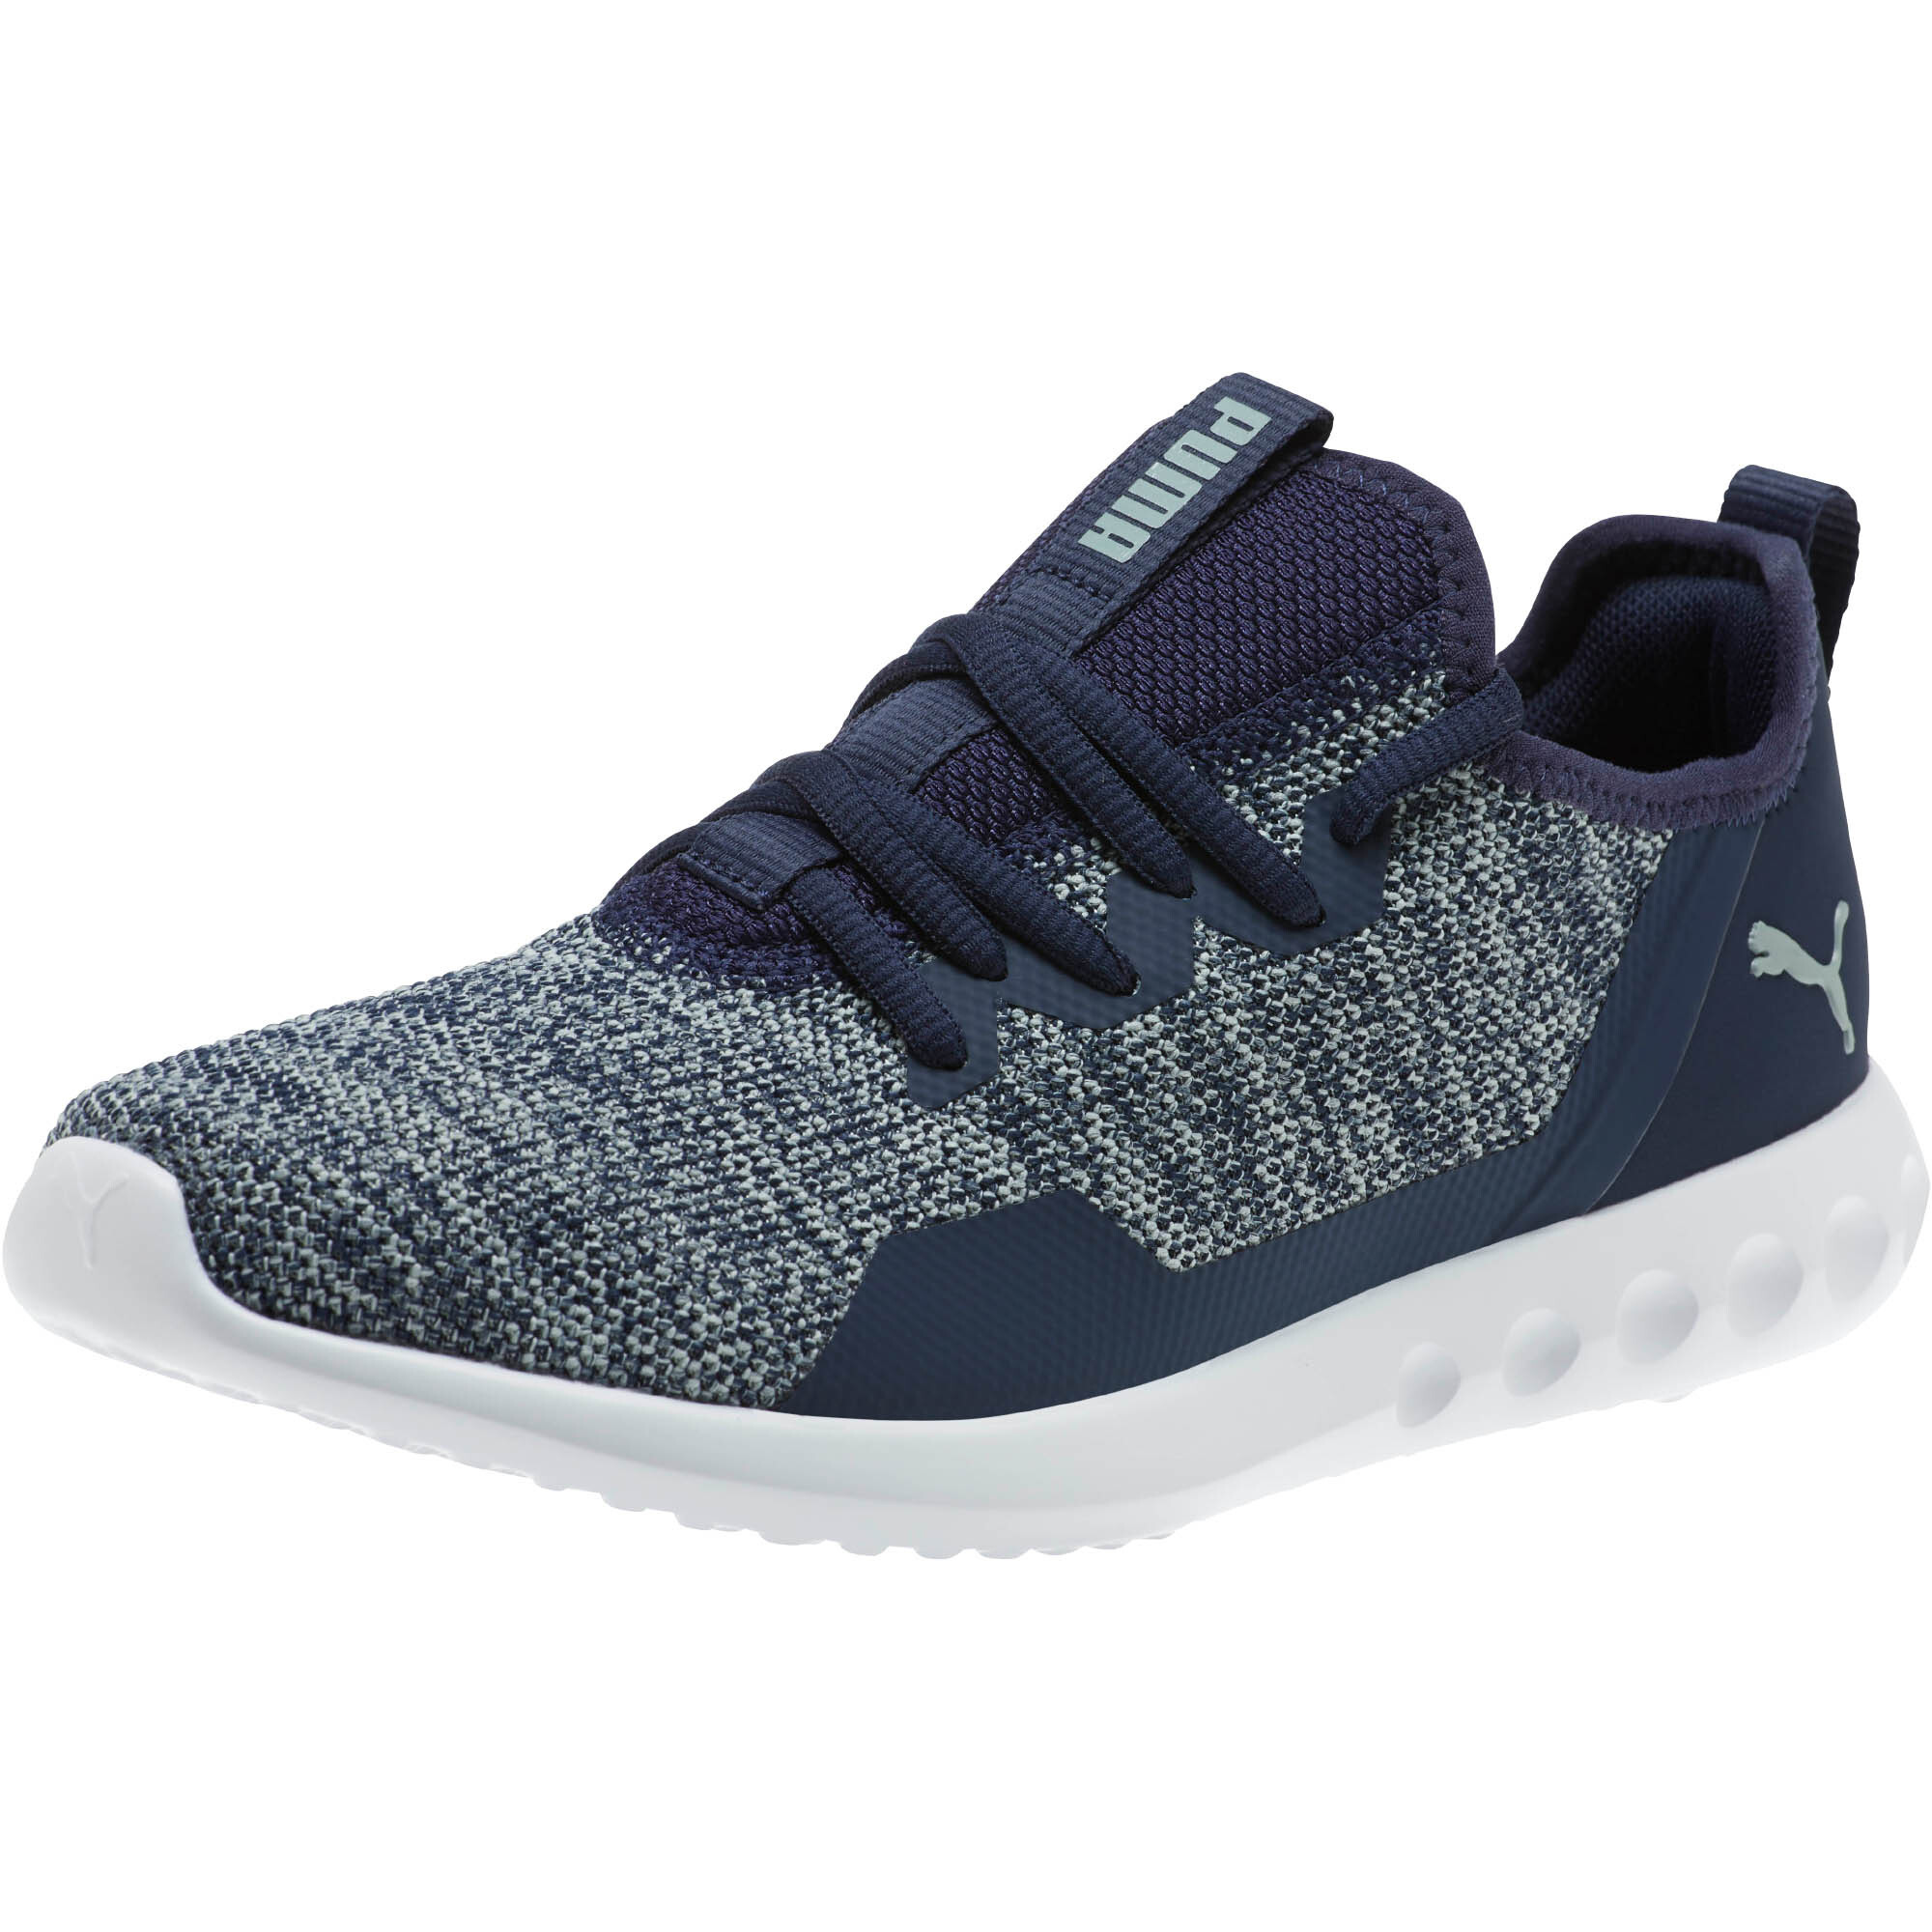 Carson 2 X Knit Running Shoes 